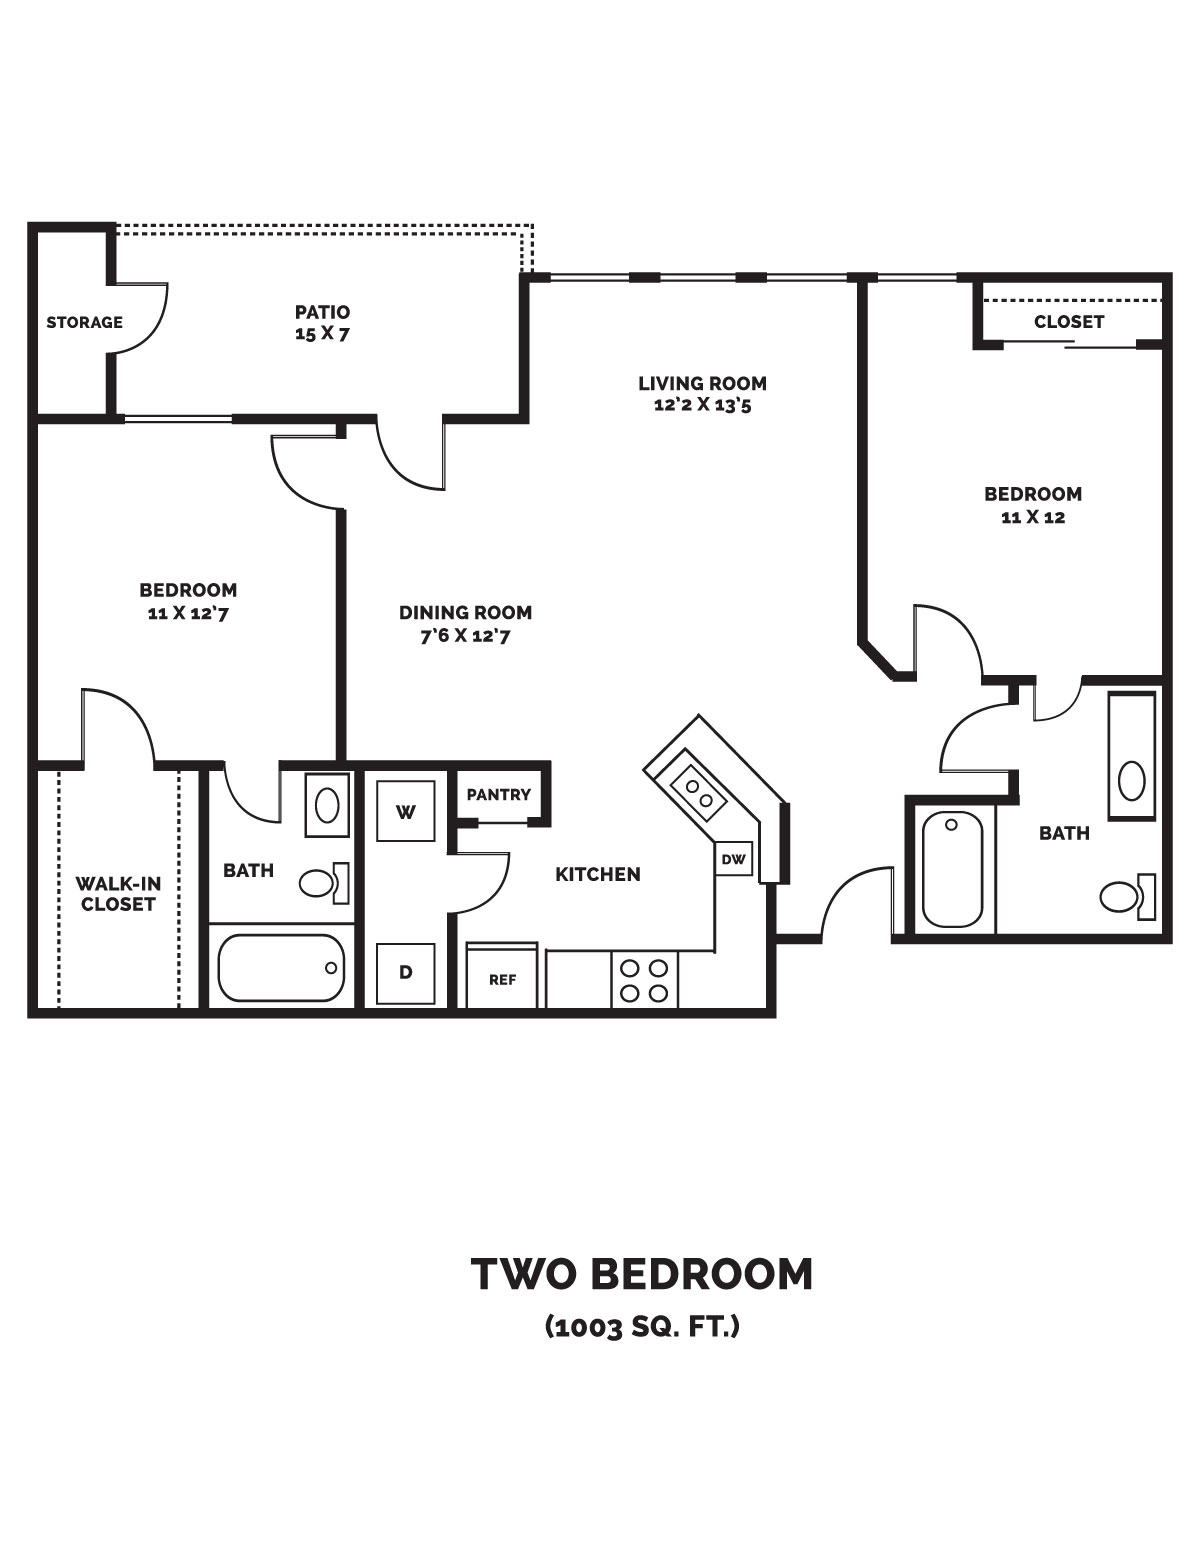 Beaumont-Trace_UnitB1_2Bed_1003-01.jpg